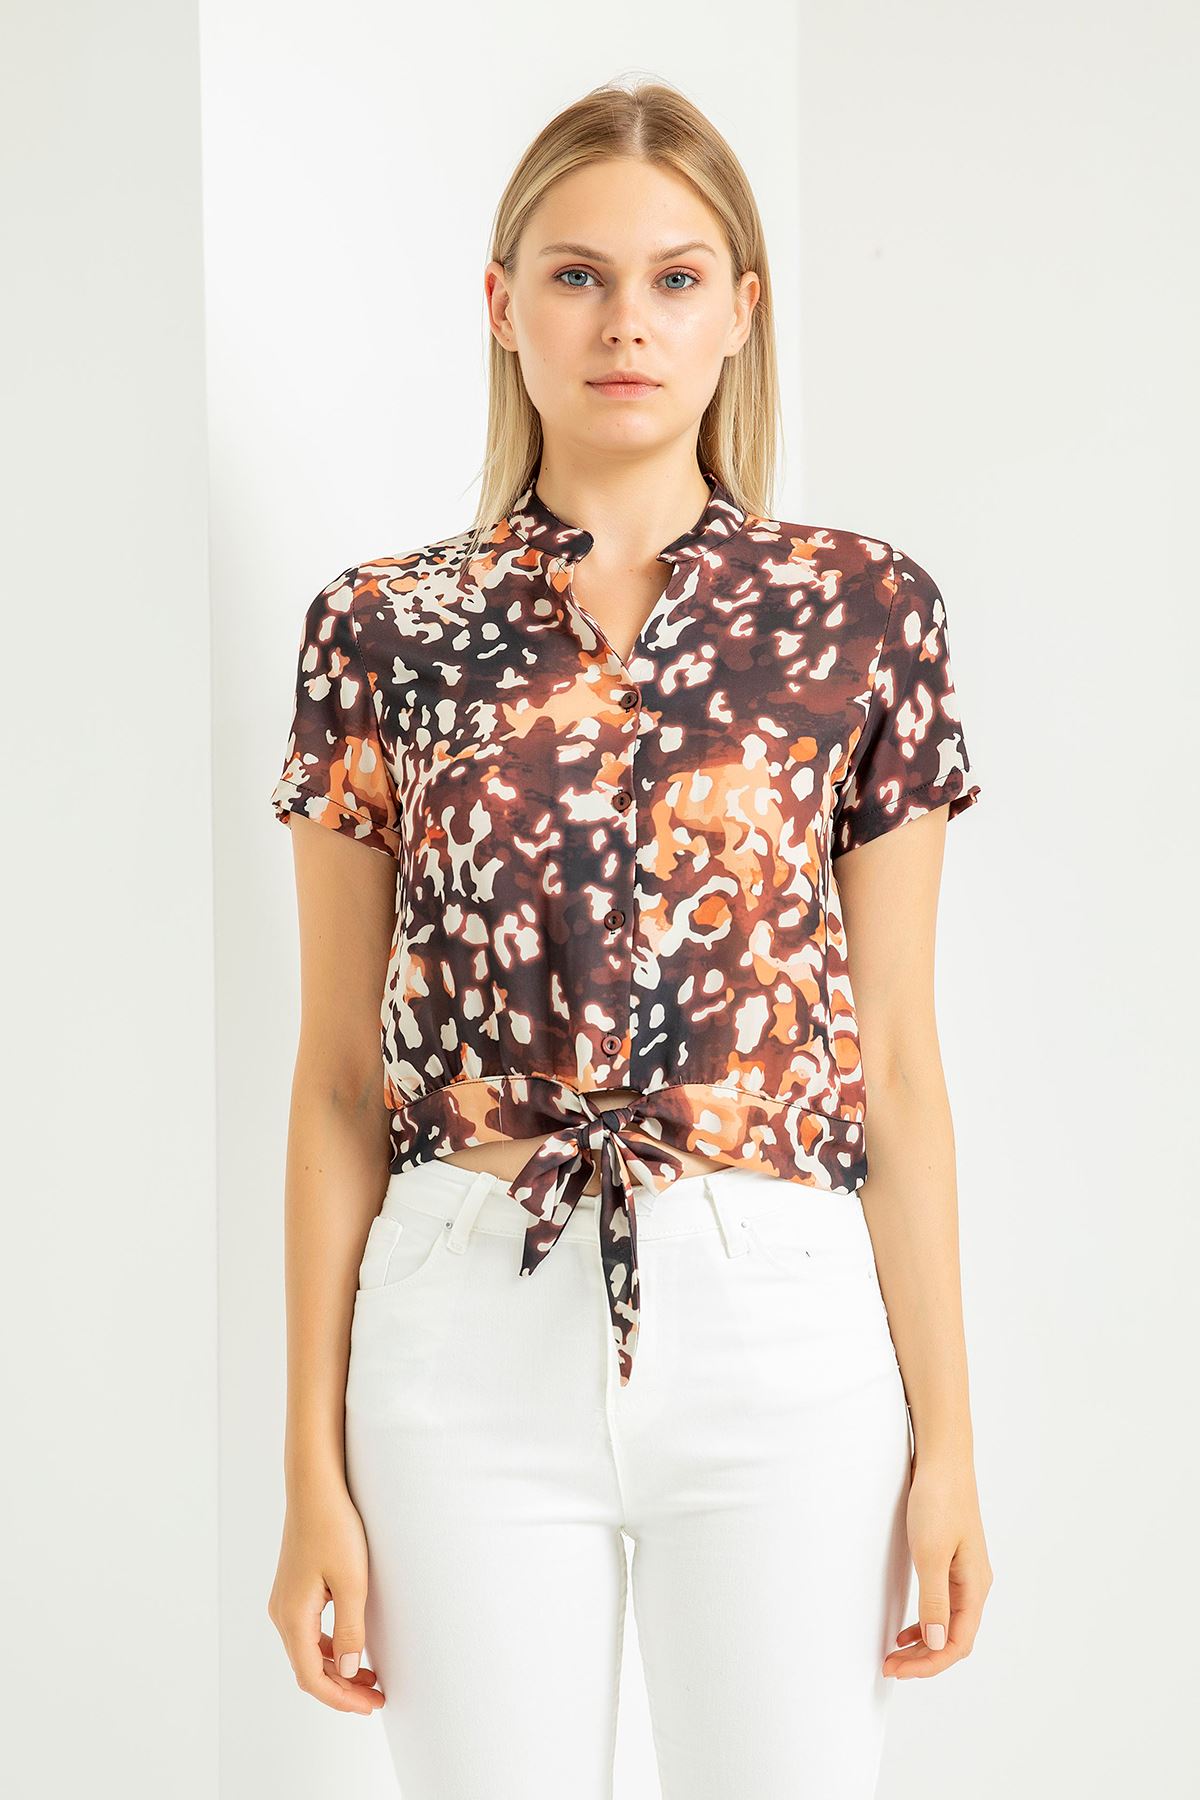 Jessica Blouse Short Sleeve Shirt Collar Leopard Print With Tie Front Blouse - Chanterelle 